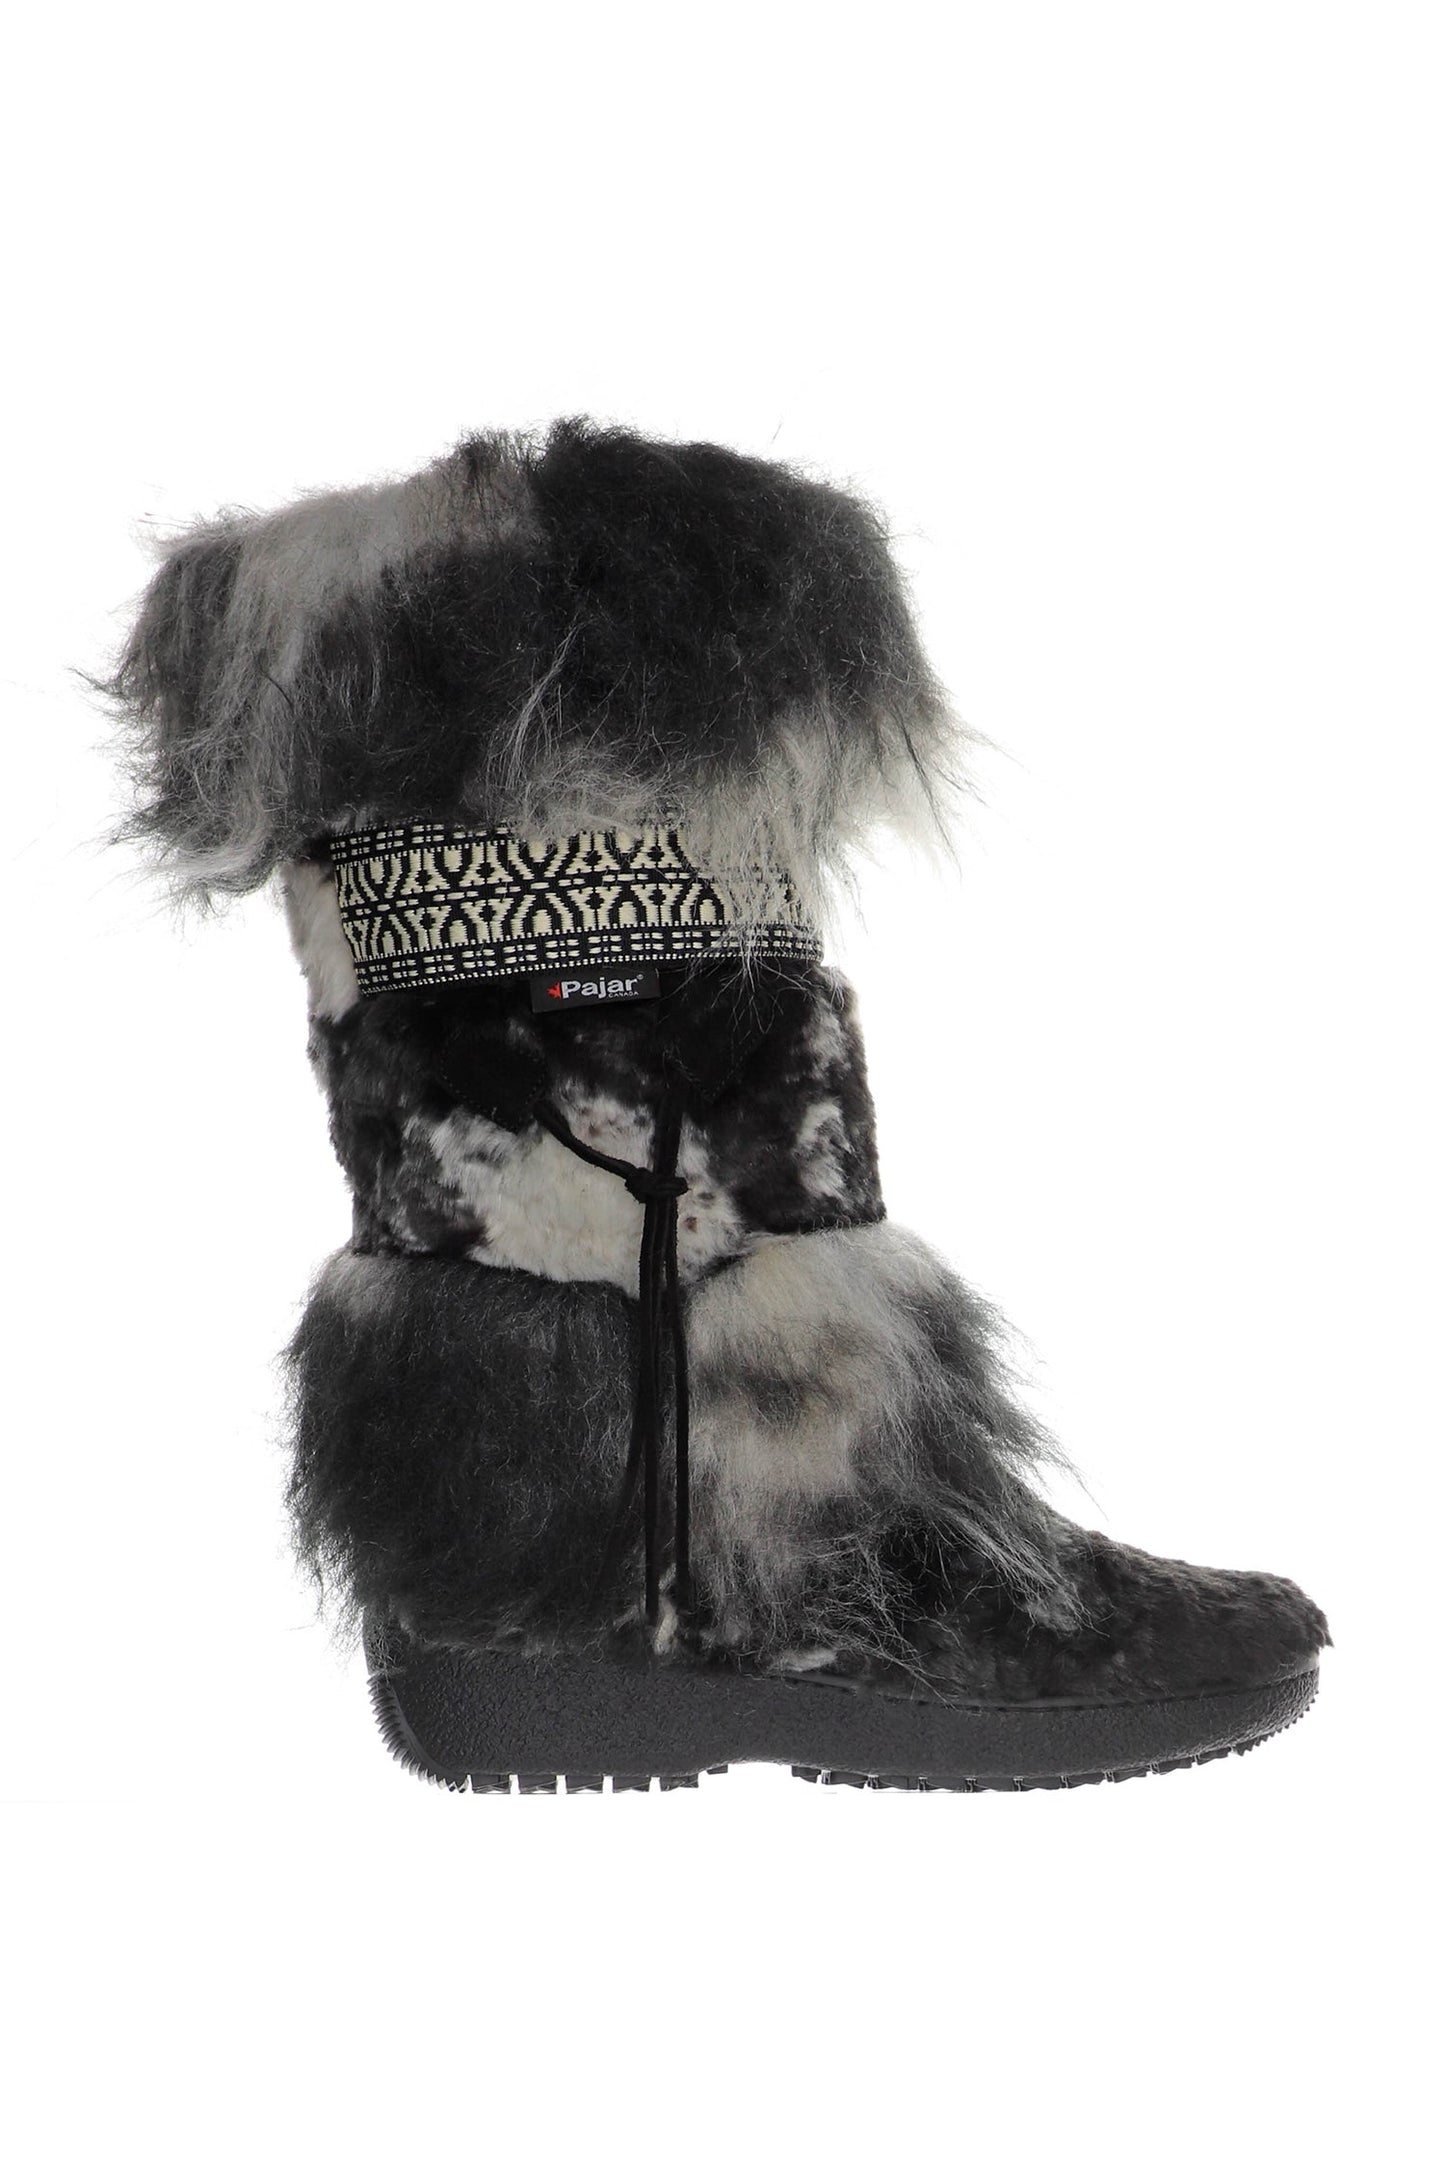 Folklore Boot, black and grey furry boots, high sole, black lace to tied, white/black border a calf high